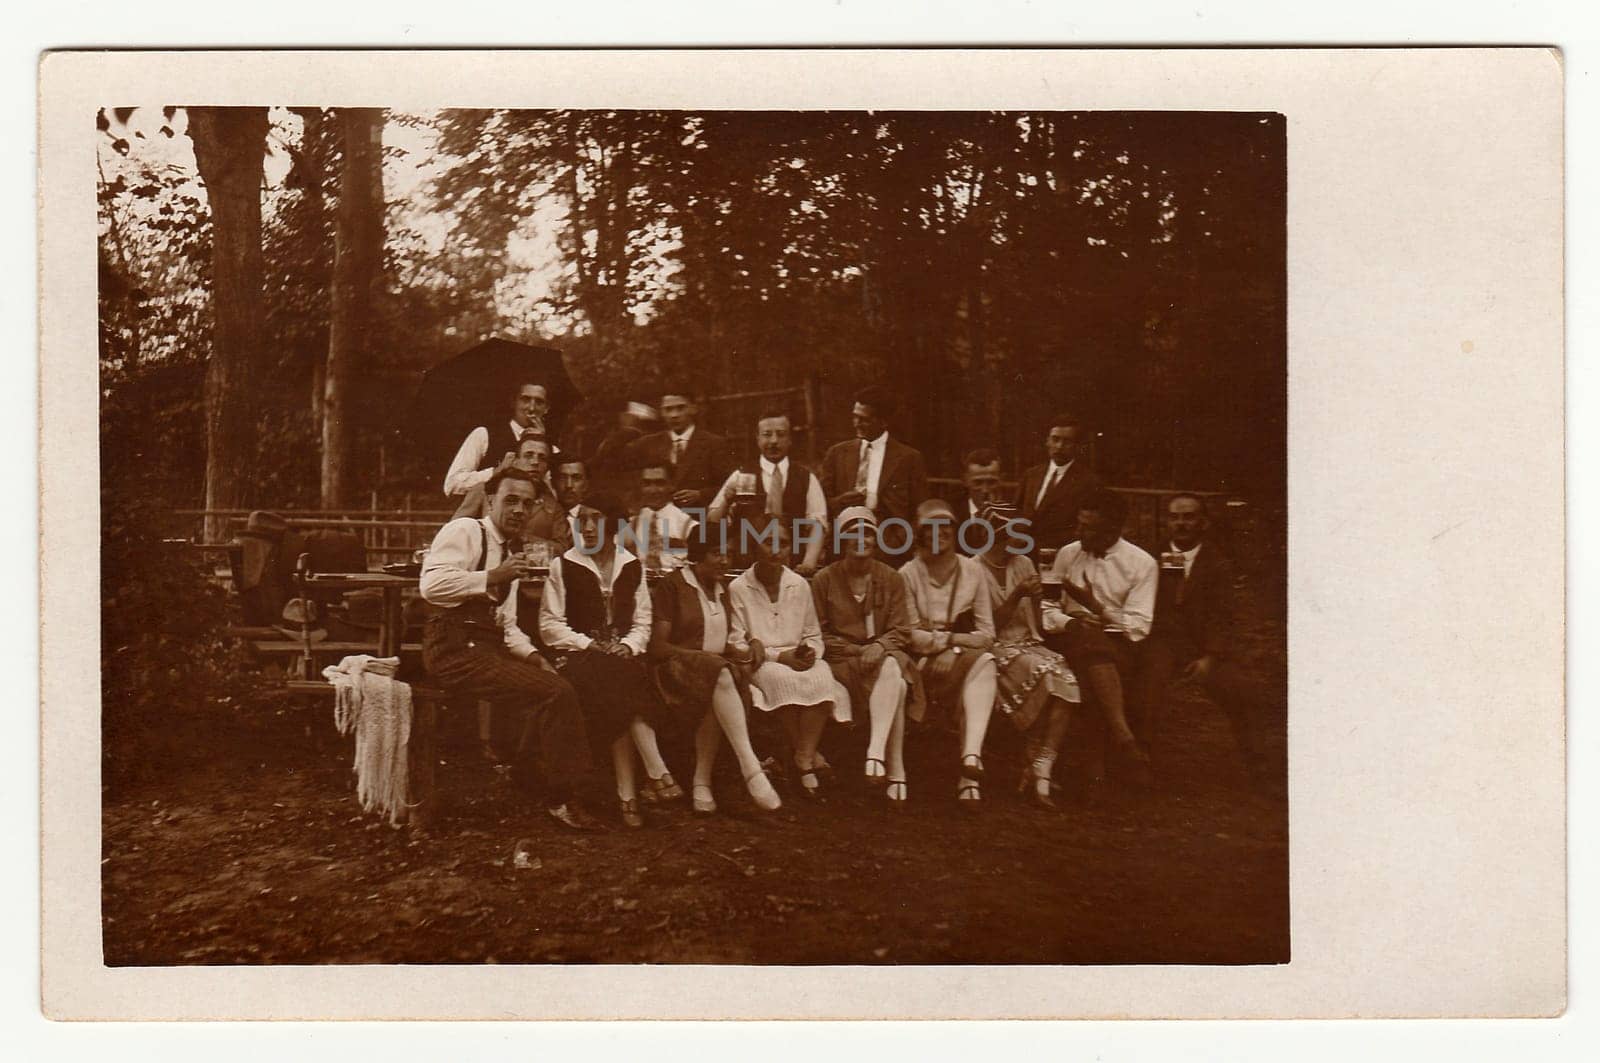 Vintage photo shows group of people in nature, circa 1930s by roman_nerud